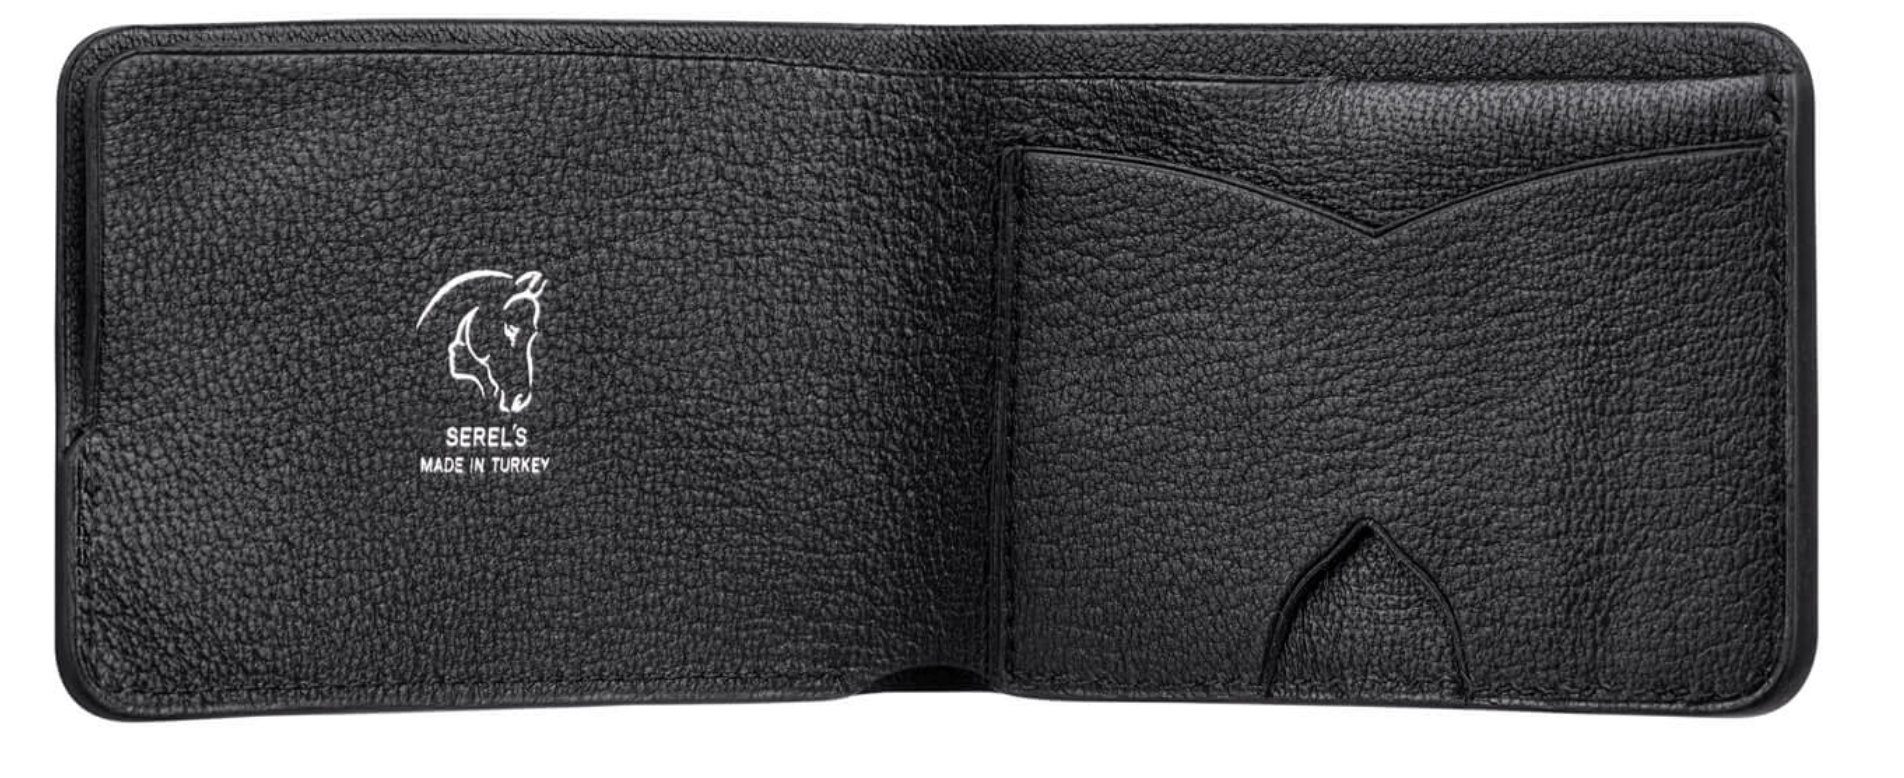 What Are The Best Full-Grain Leather Wallets for Men and Women – Serel's